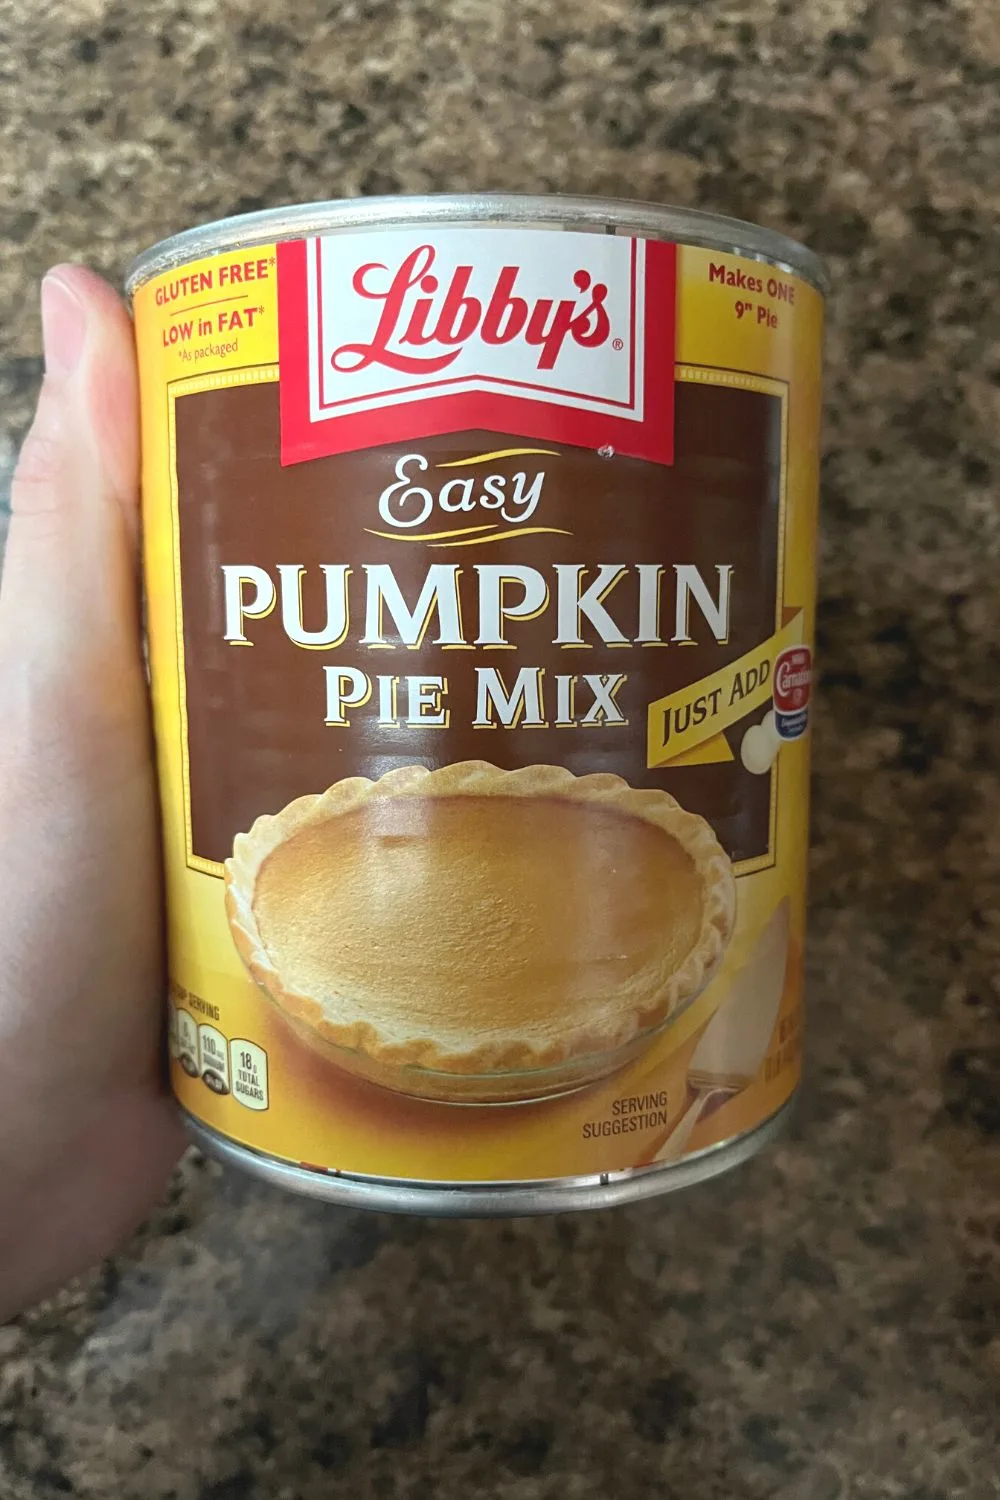 a can of Libby's Pumpkin Pie Mix